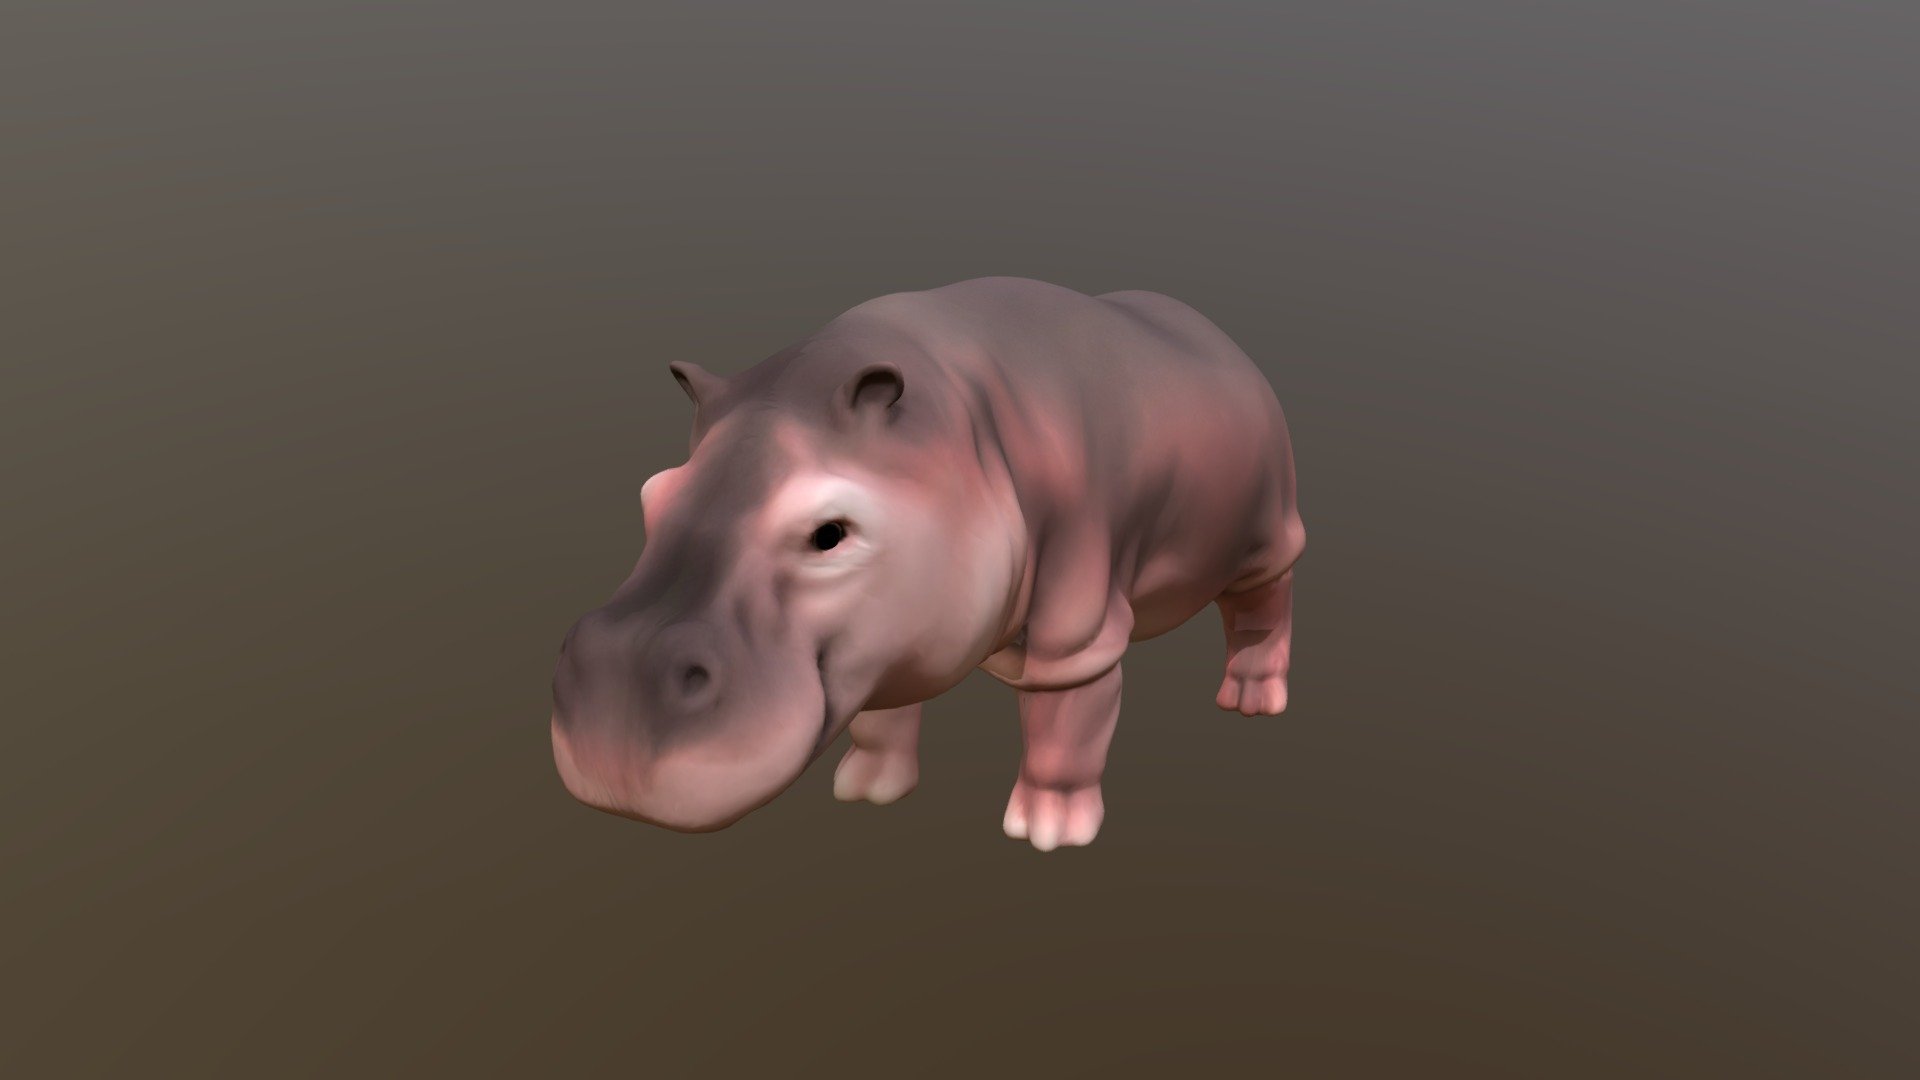 Rebuilt of this Hippo now with eyeball
&ldquo;Hippos